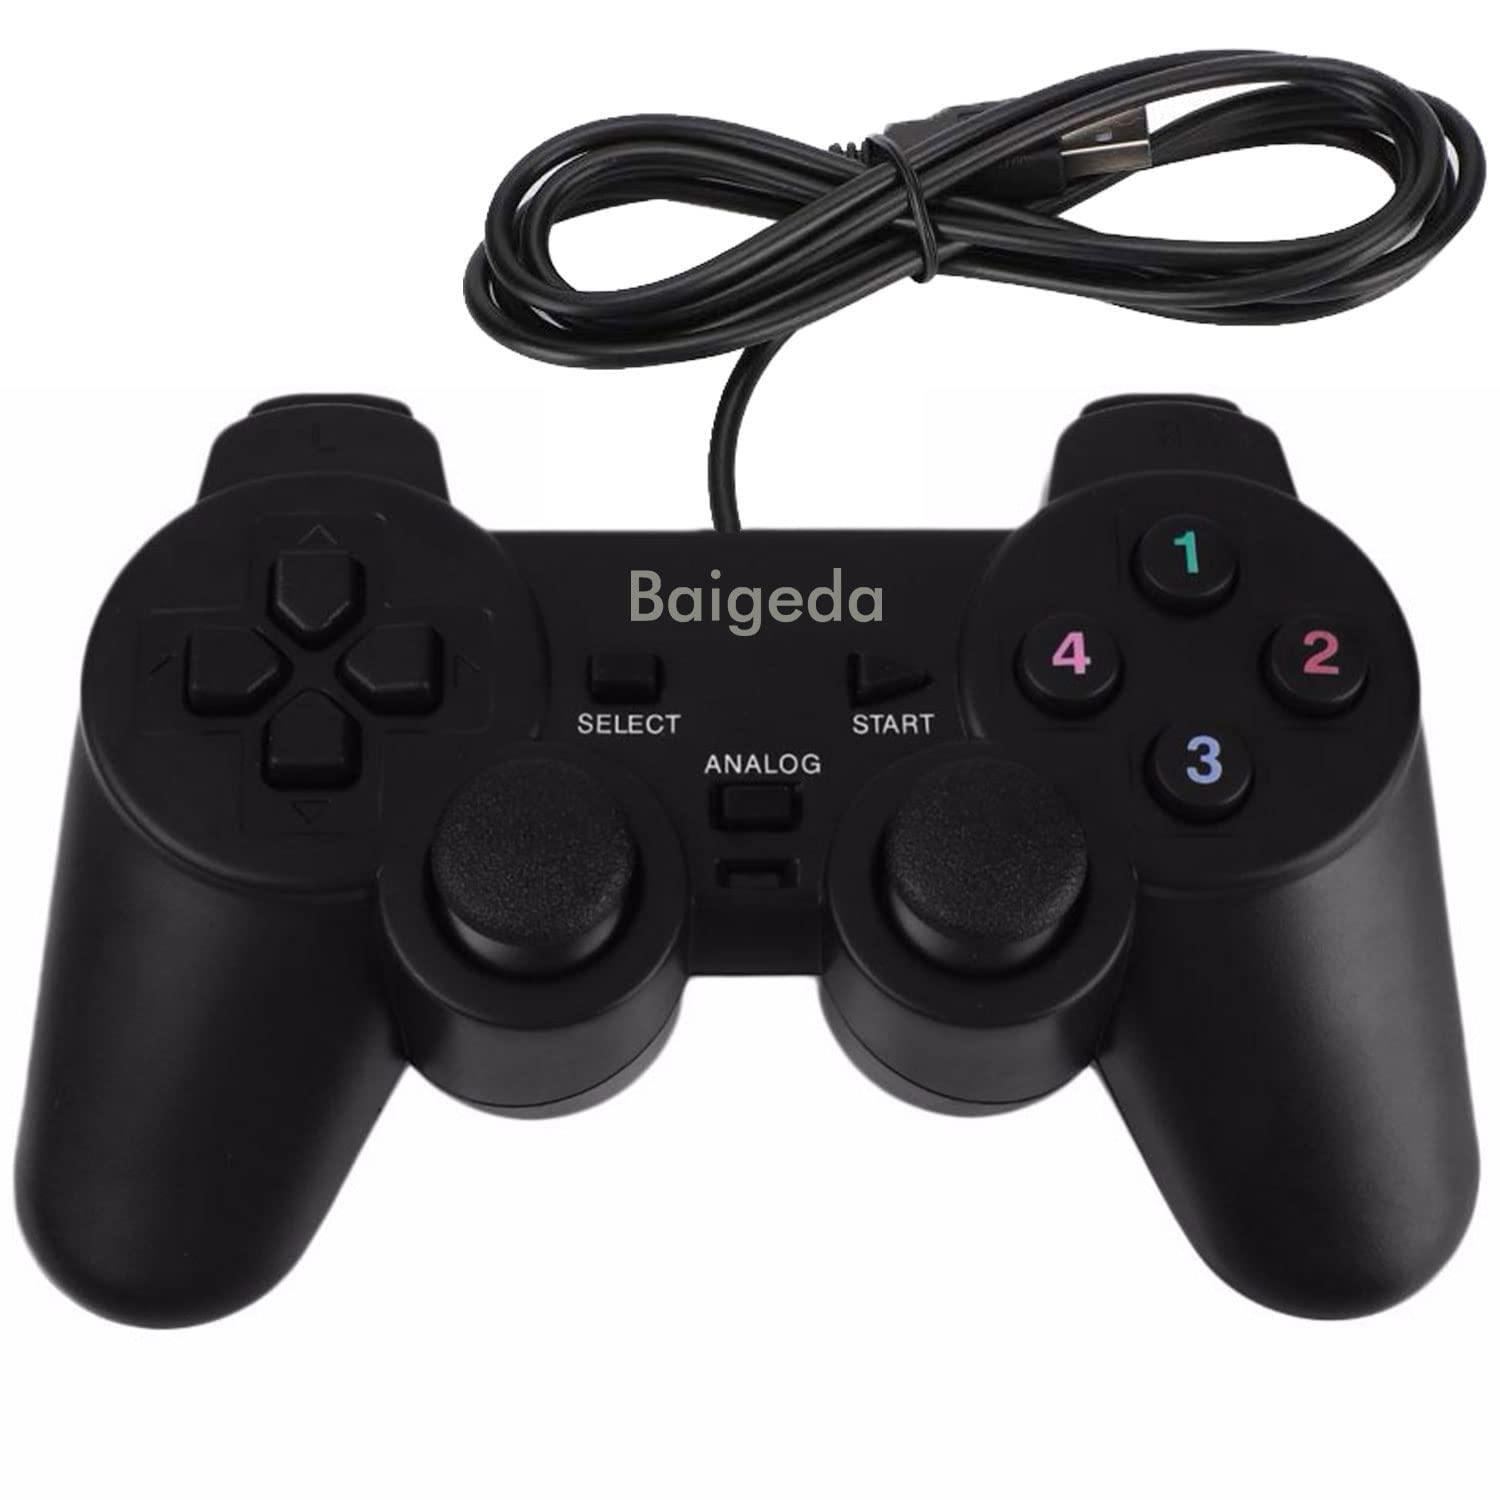 Baigeda Wired Game Controller: How To Connect